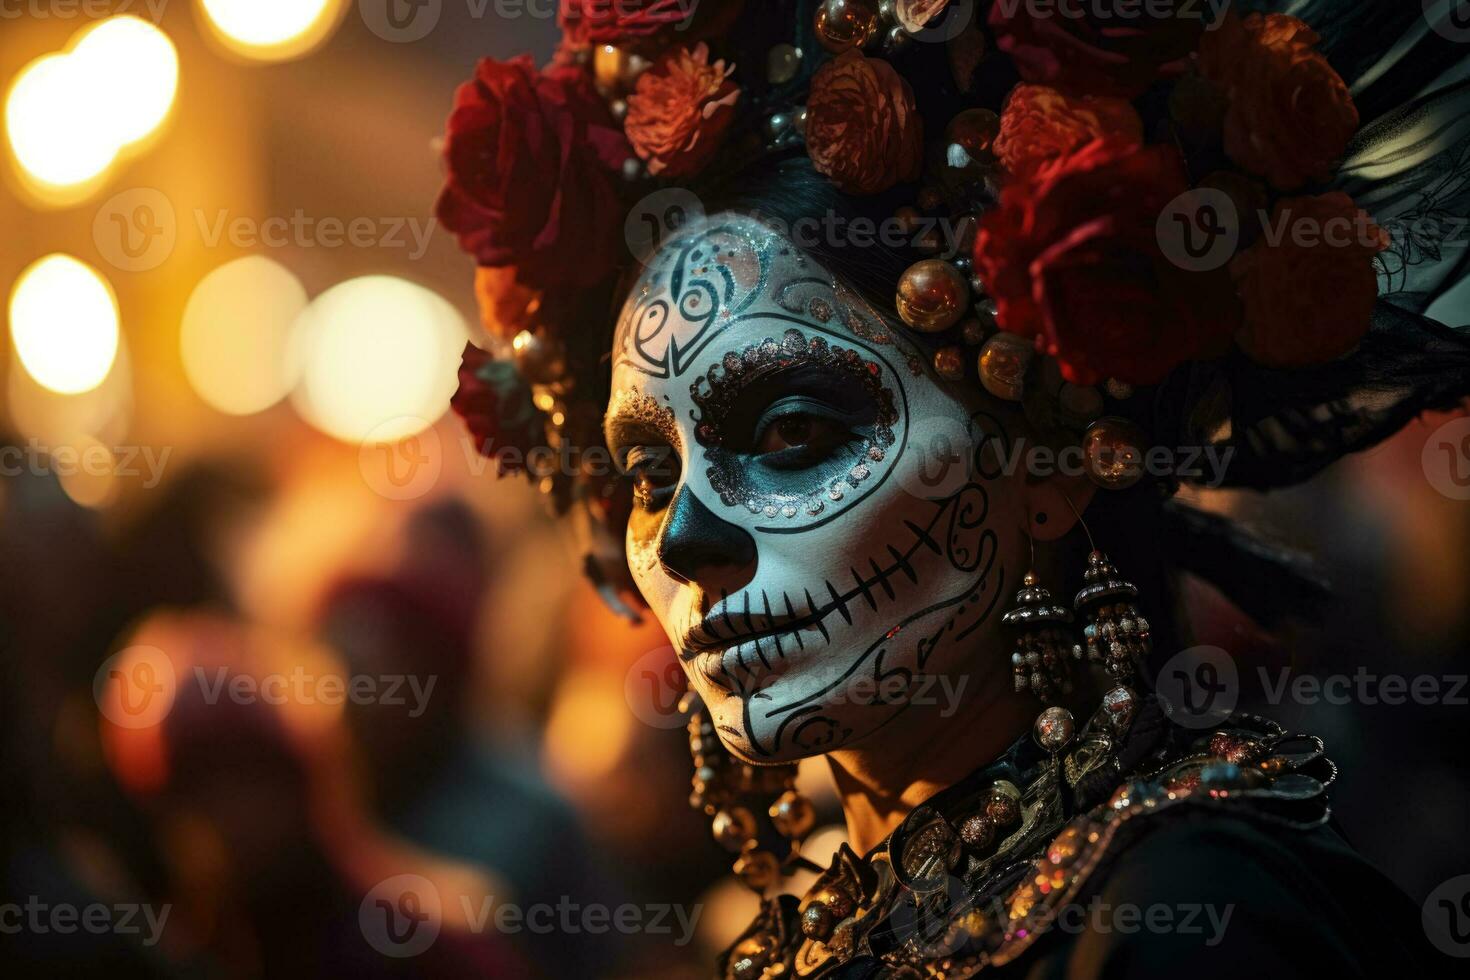 Elegant Catrinas procession with elaborate costumes in Day of the Dead celebration photo